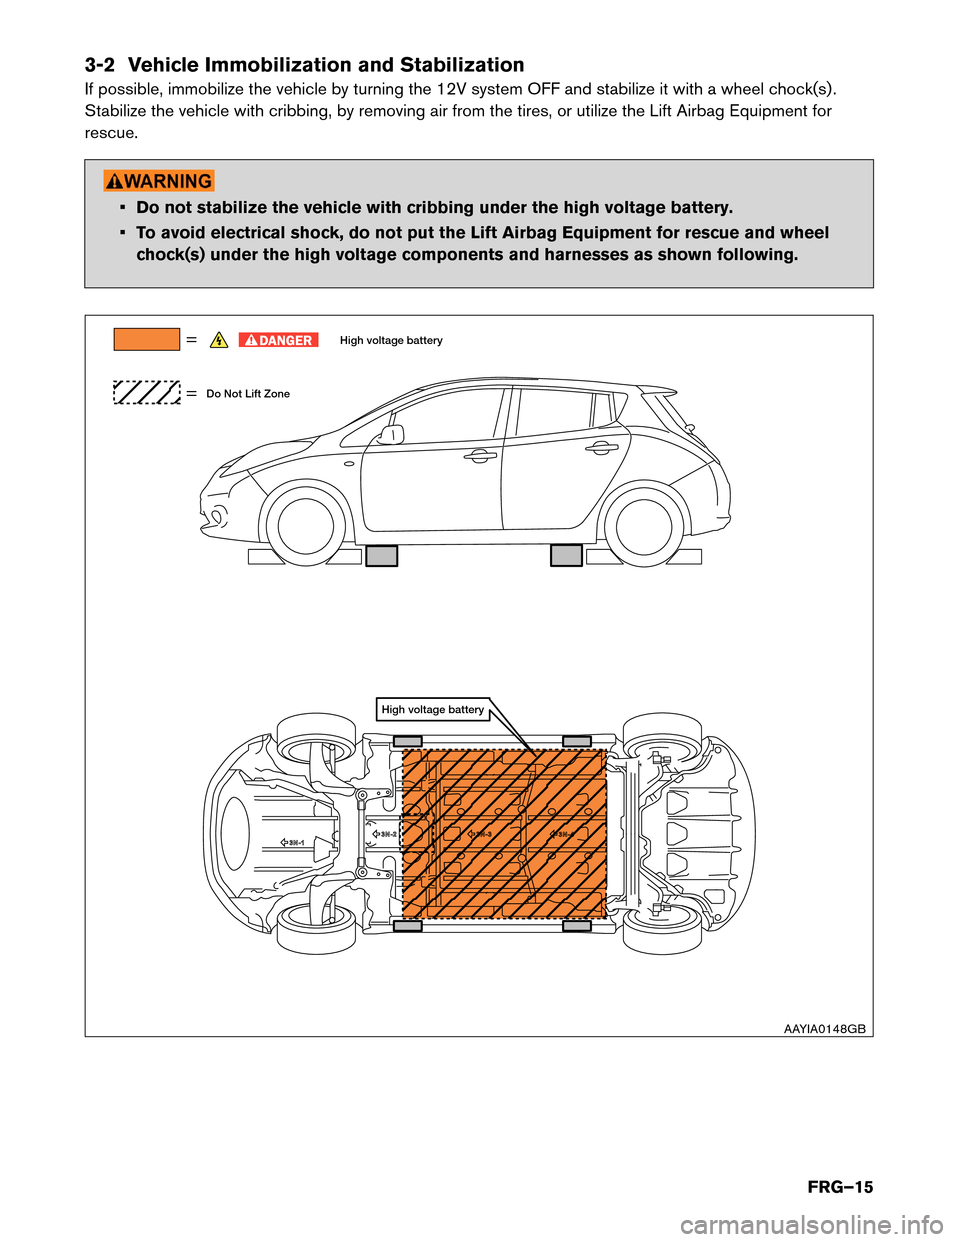 NISSAN LEAF 2016 1.G First Responders Guide 3-2 Vehicle Immobilization and Stabilization
If
possible, immobilize the vehicle by turning the 12V system OFF and stabilize it with a wheel chock(s) .
Stabilize the vehicle with cribbing, by removing